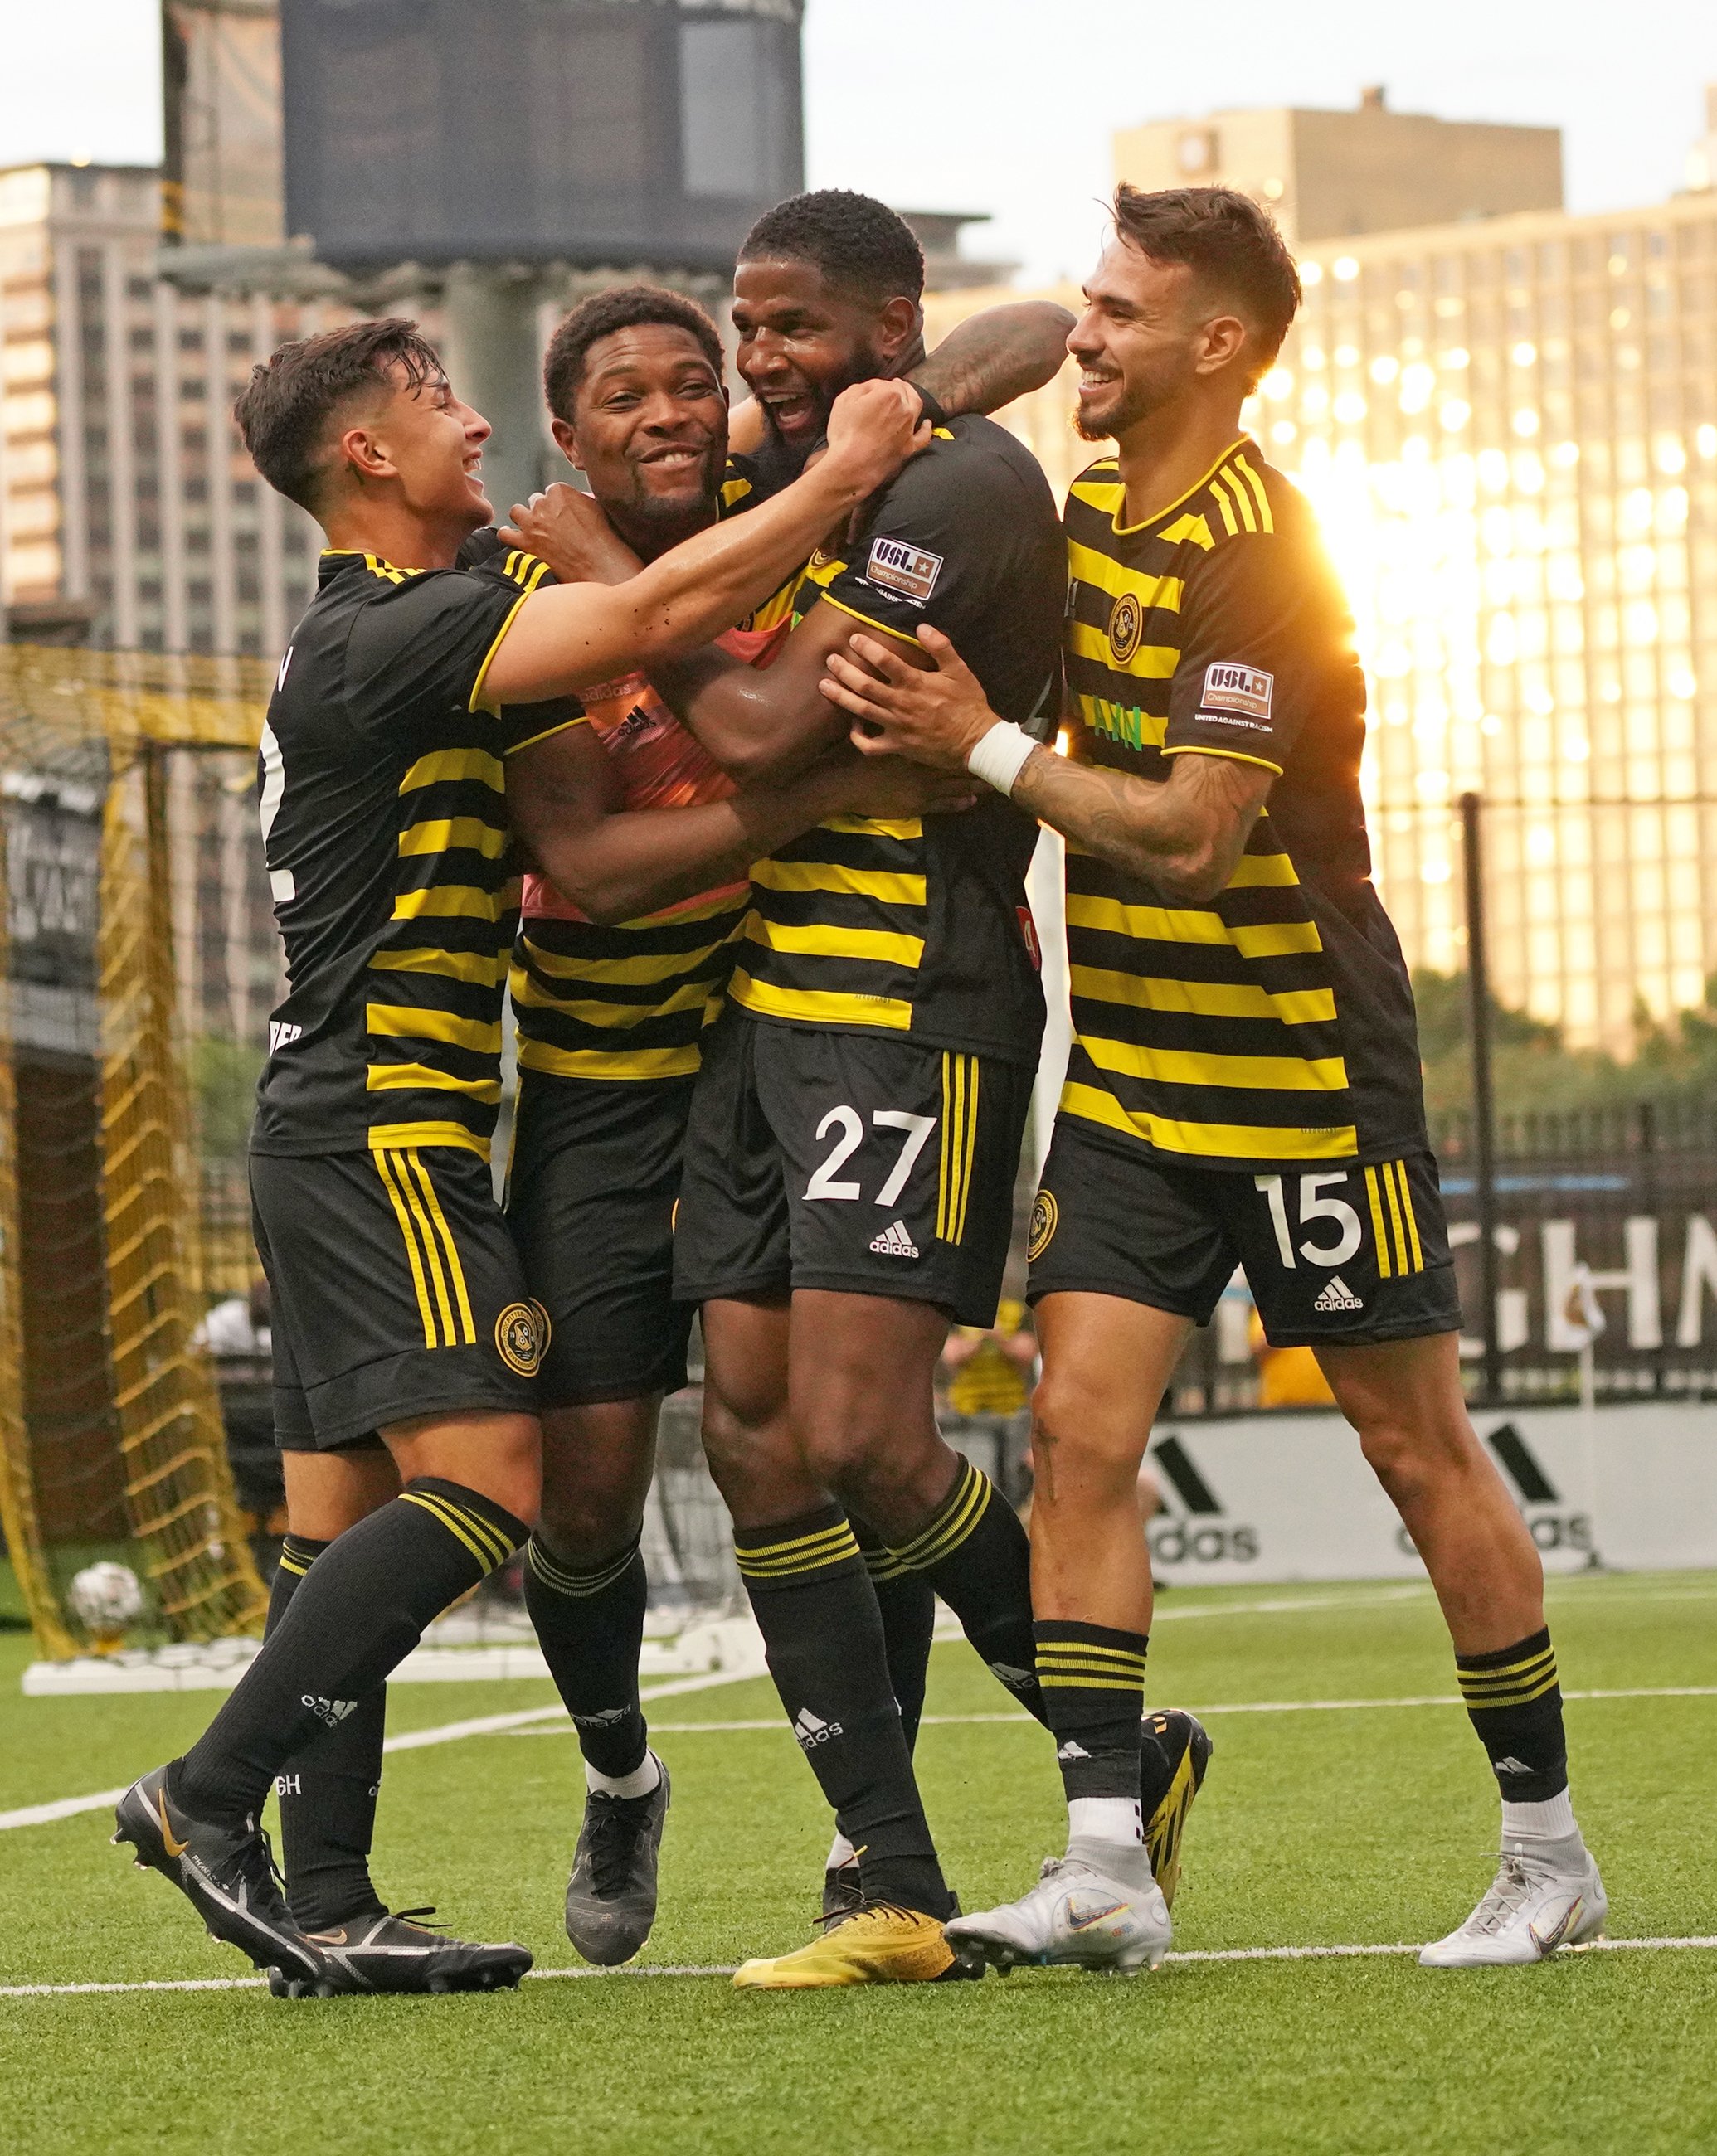  The Riverhounds’ Jelani Peters (27) celebrates with his team after scoring his second, team’s third, goal of the game against Miami FC on Saturday, July 9, 2022, at Highmark Stadium in Pittsburgh’s Station Square. The Riverhounds won 4-1. (Emily Mat